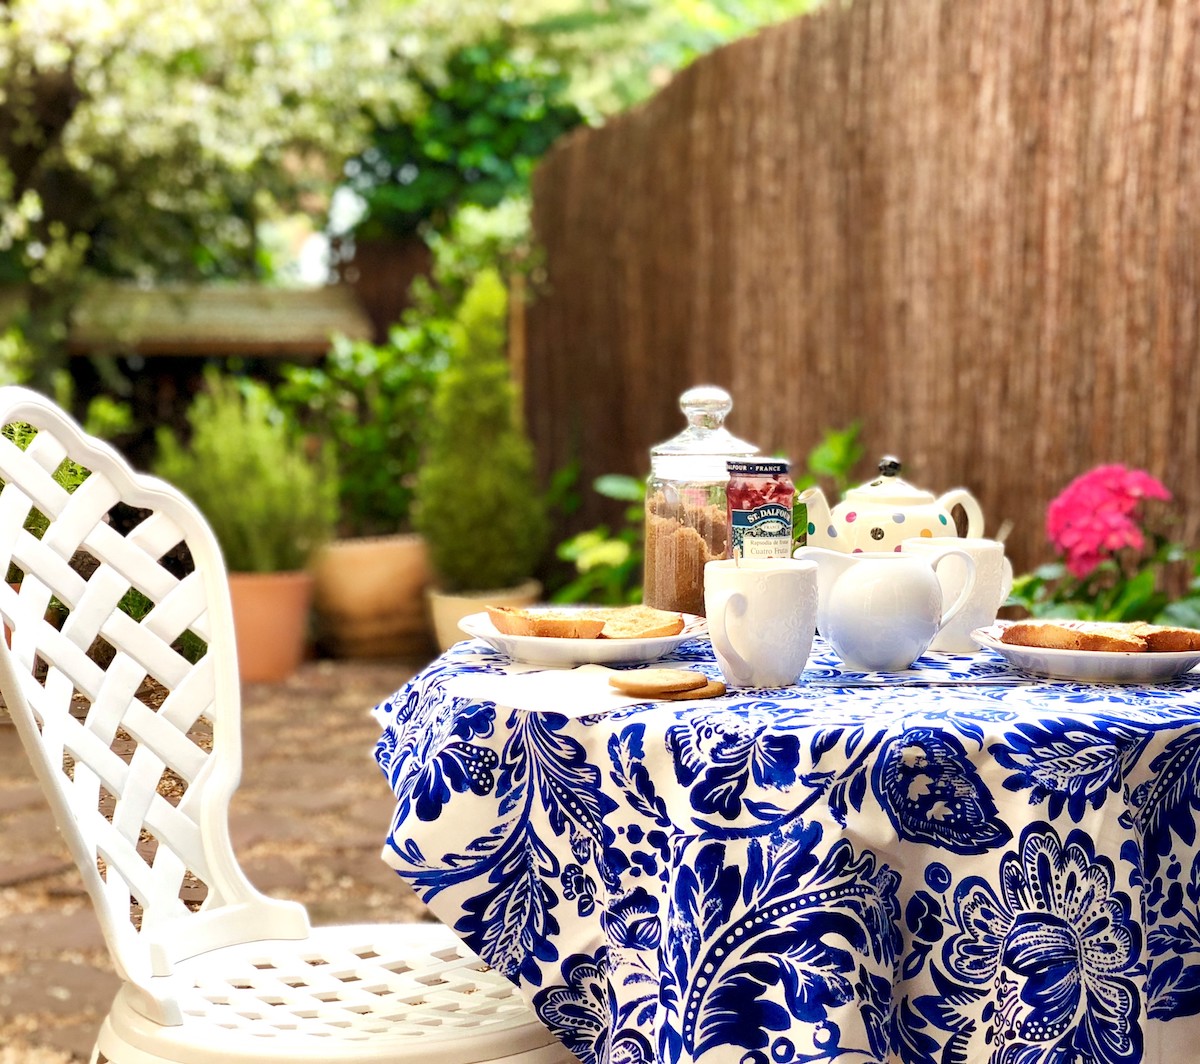 How to make a garden tablecloth without sewing